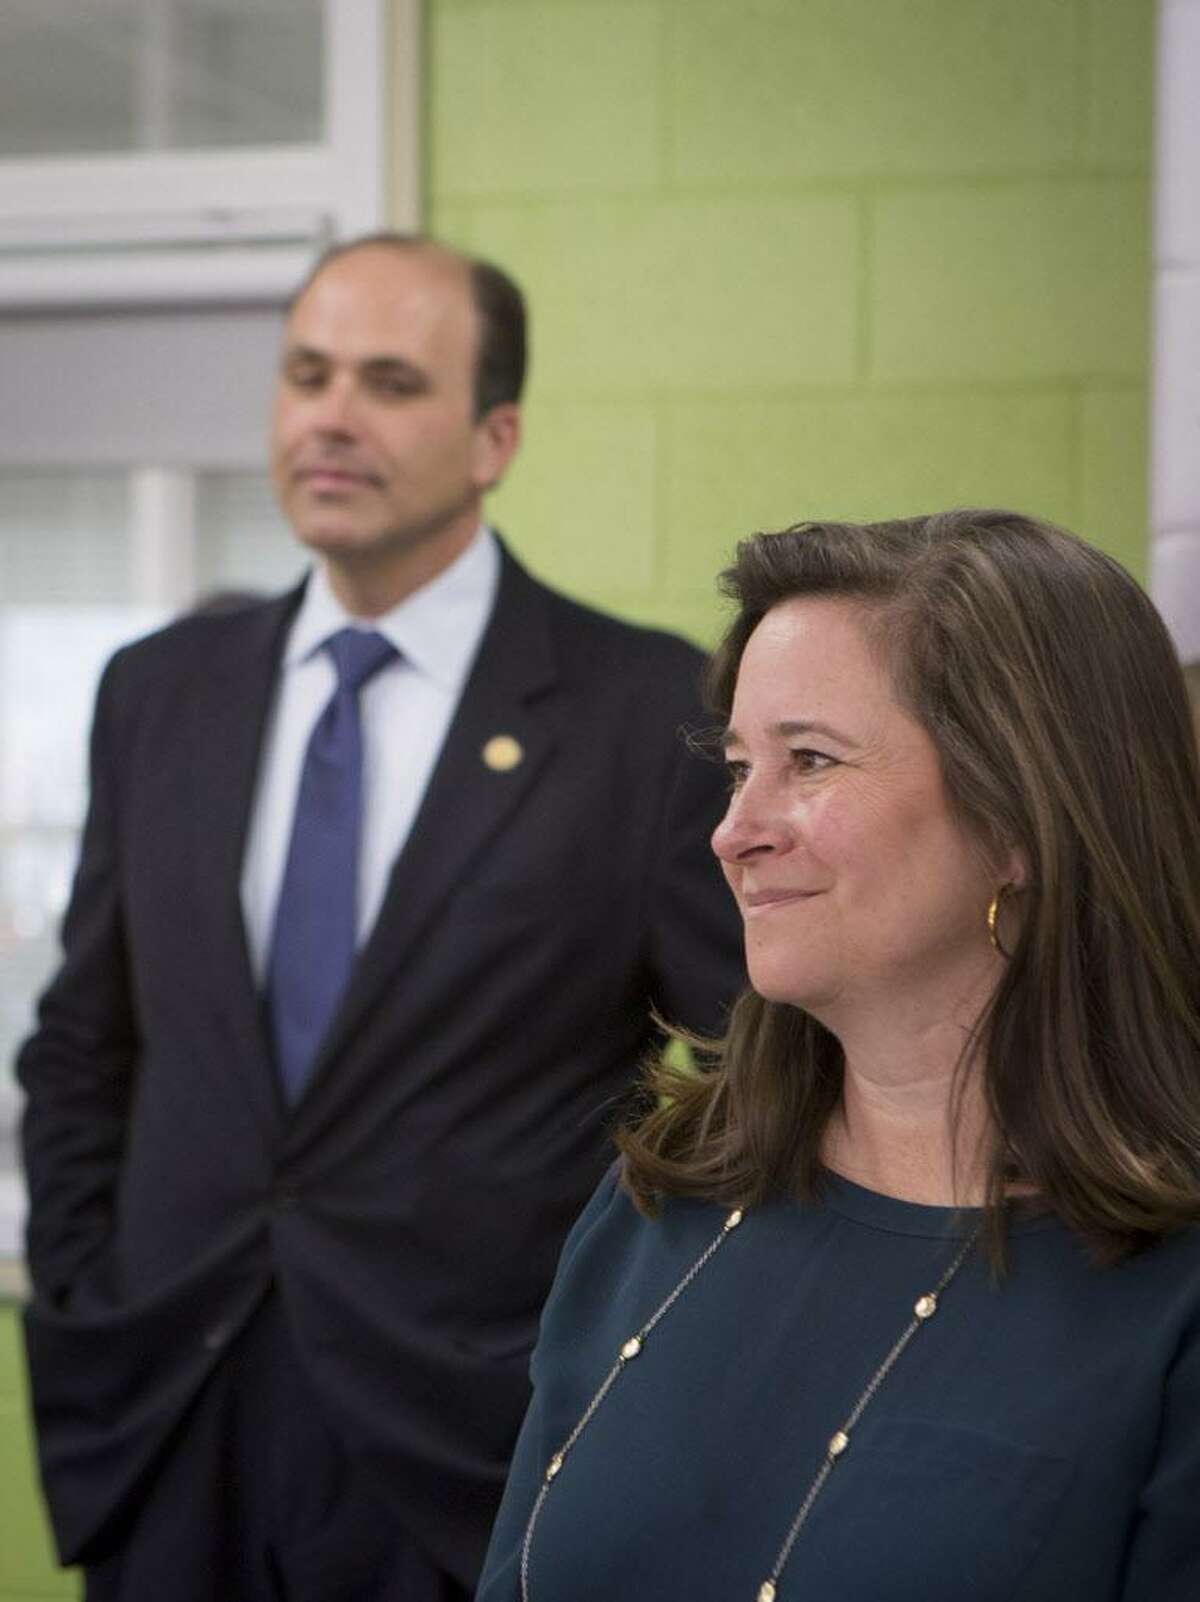 Democrat Shelly Simonds, right, attends a function at Heritage High School in November along with Republican David Yancey.